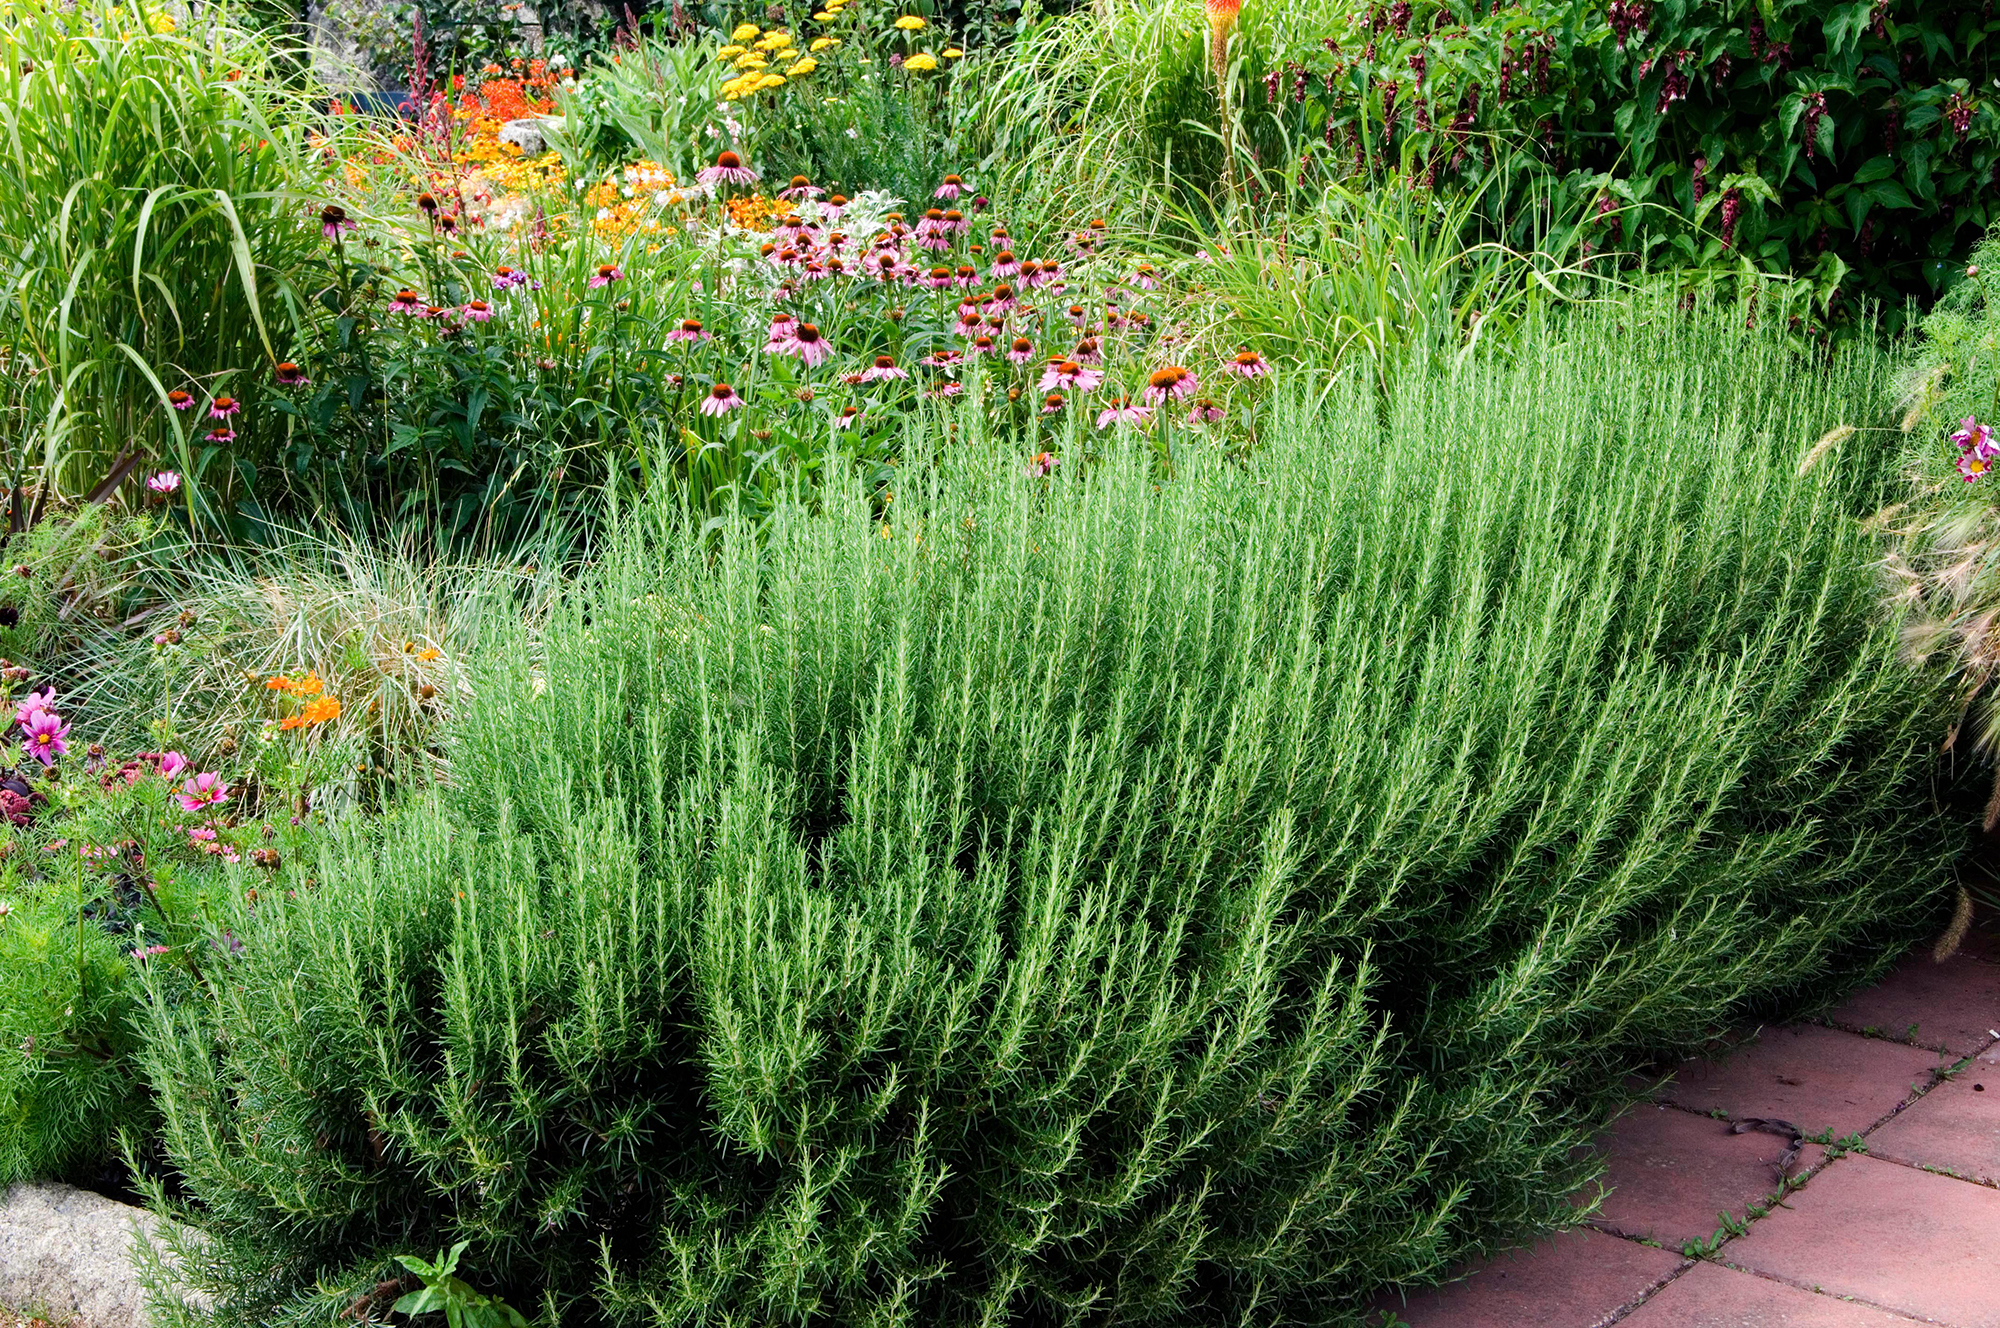 Rosemary hedge bordering ornamental grasses and flowers including echinacea